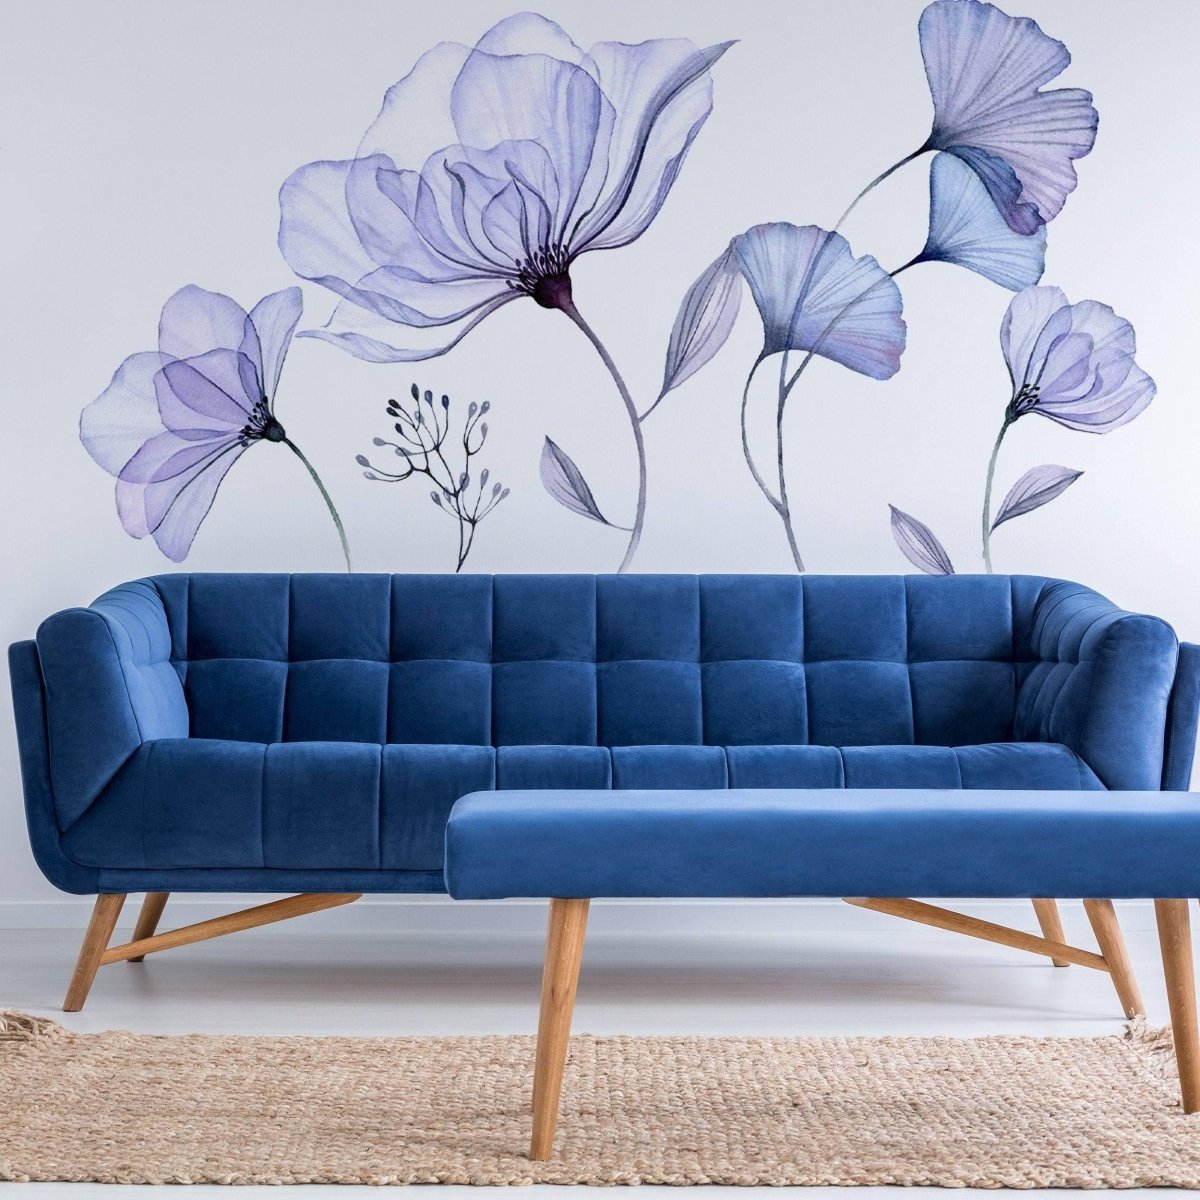 Large 3D Blue Flowers Wall Art Stickers Removable Home Decor Bedroom Vinyl  Mural